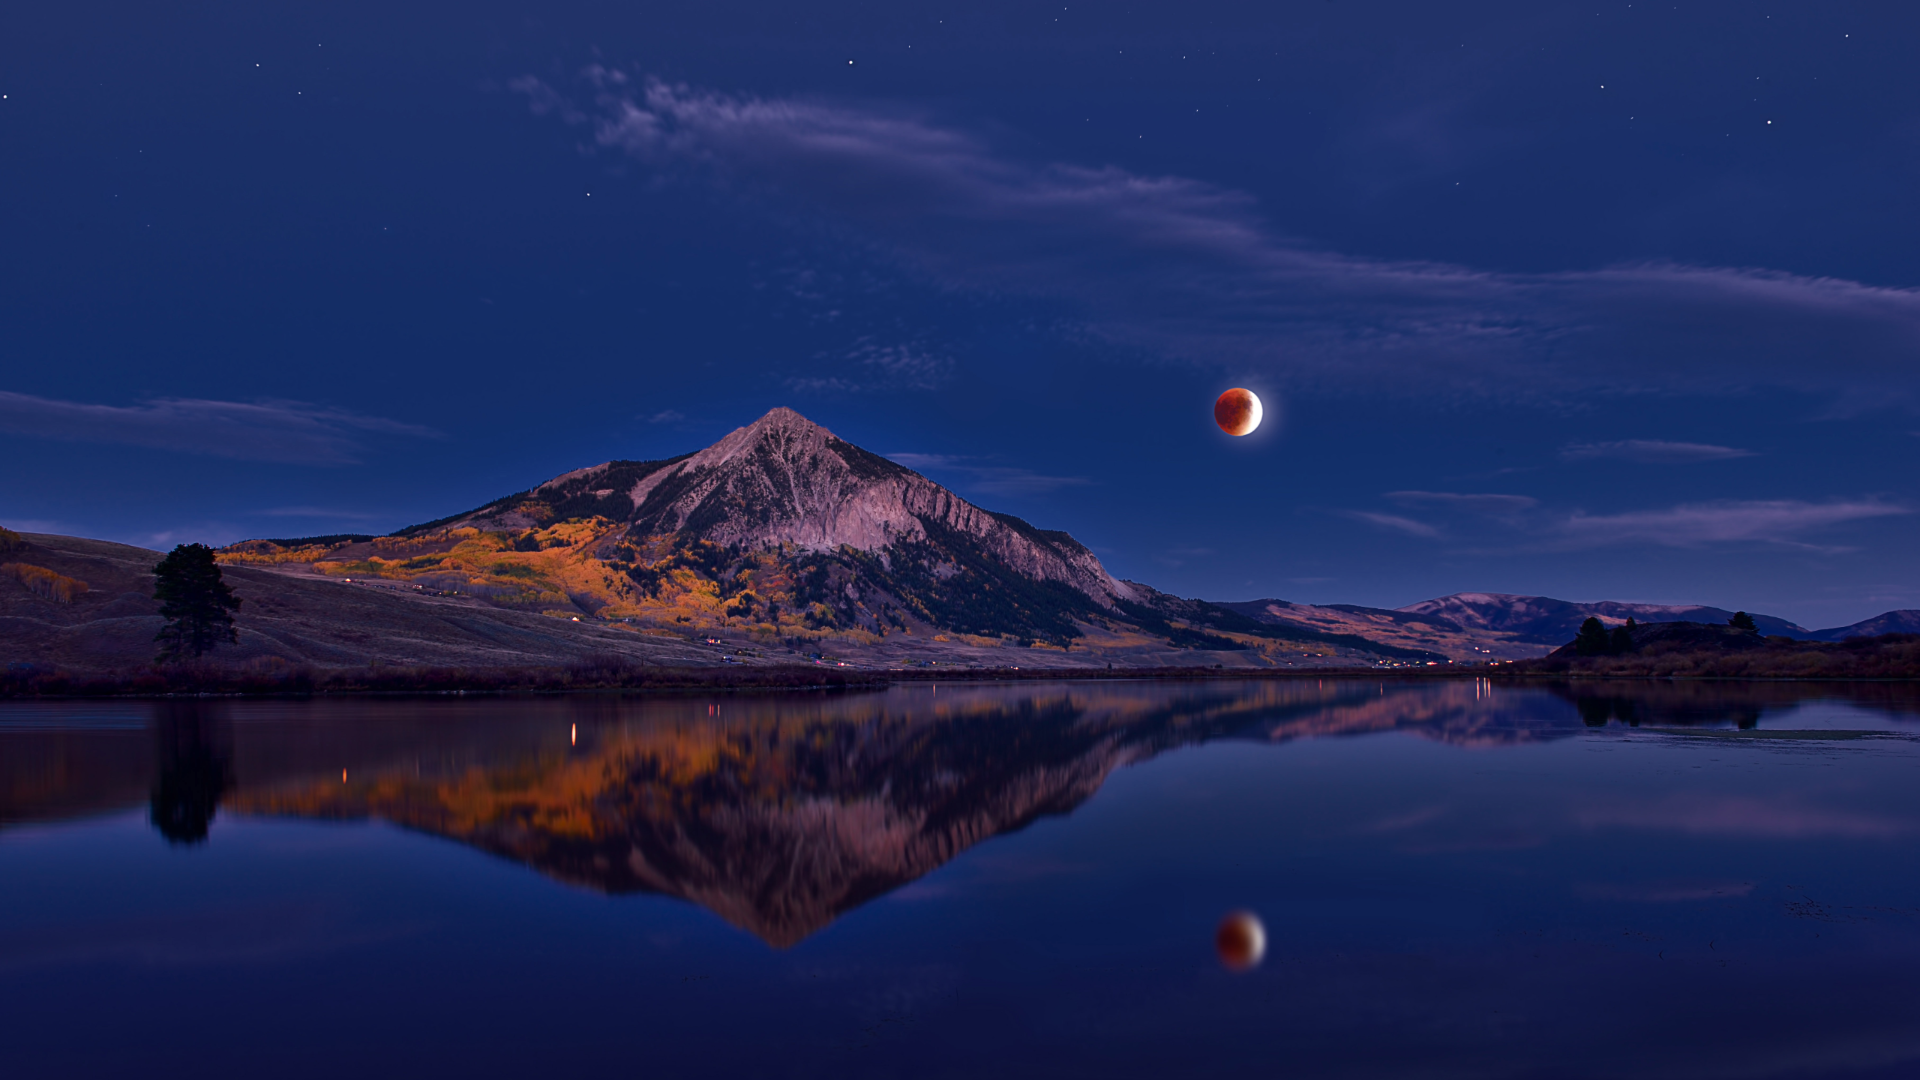 General 1920x1080 nature landscape mountains sky clouds lake water Moon red moon trees stars reflection lunar eclipse  Mount Crested Butte USA Bing